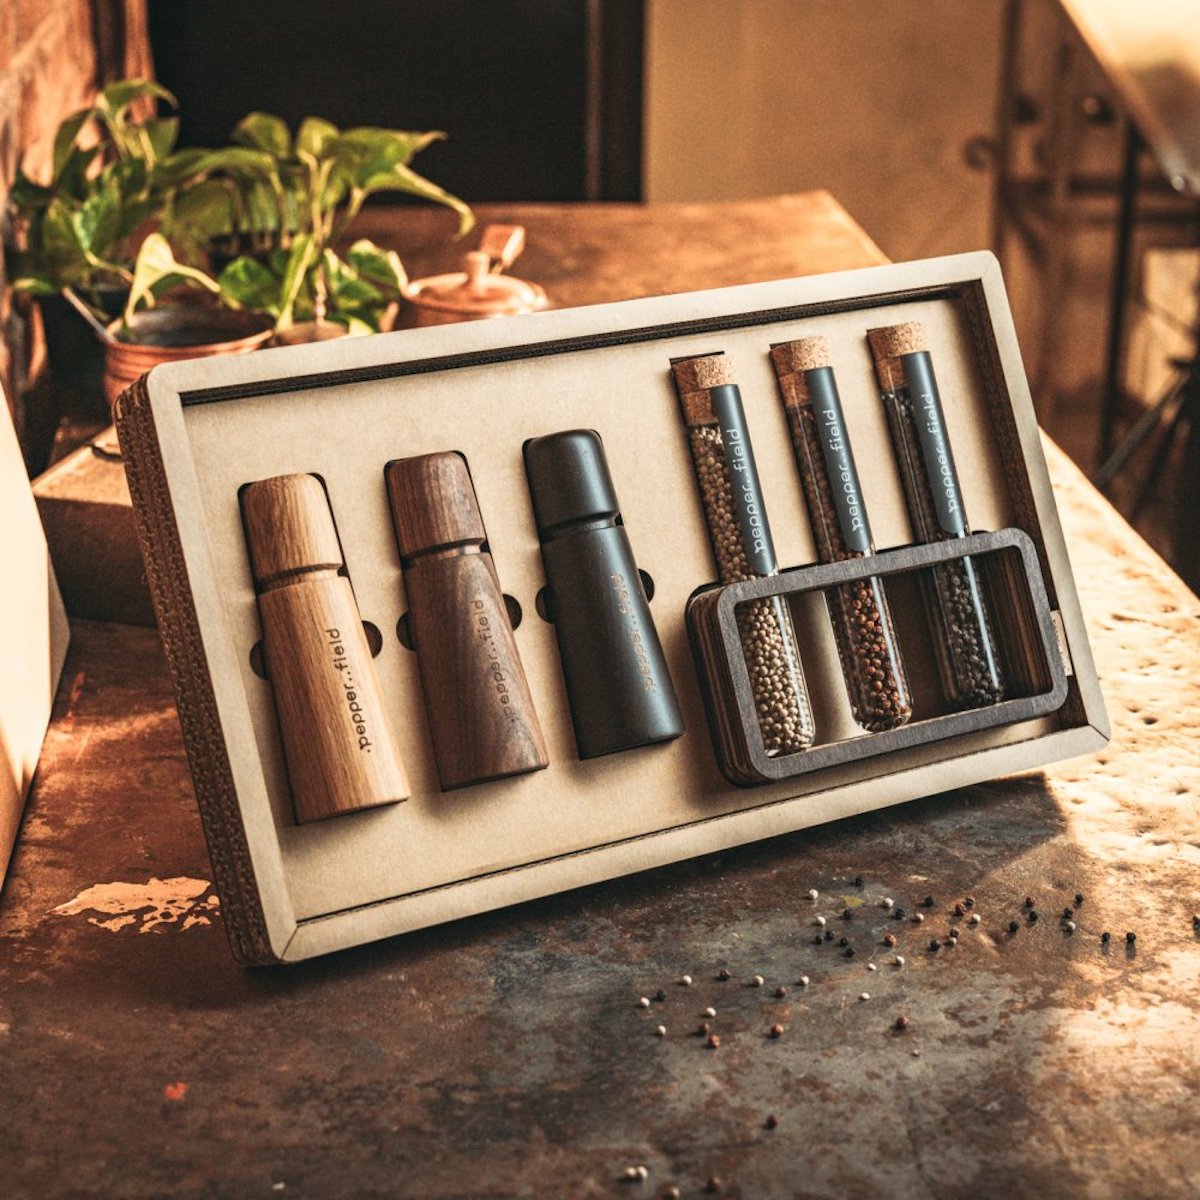 Luxury gift case made of recycled cardboard with 3 grinders and Kampot pepper 3x70g in tubes with a stand